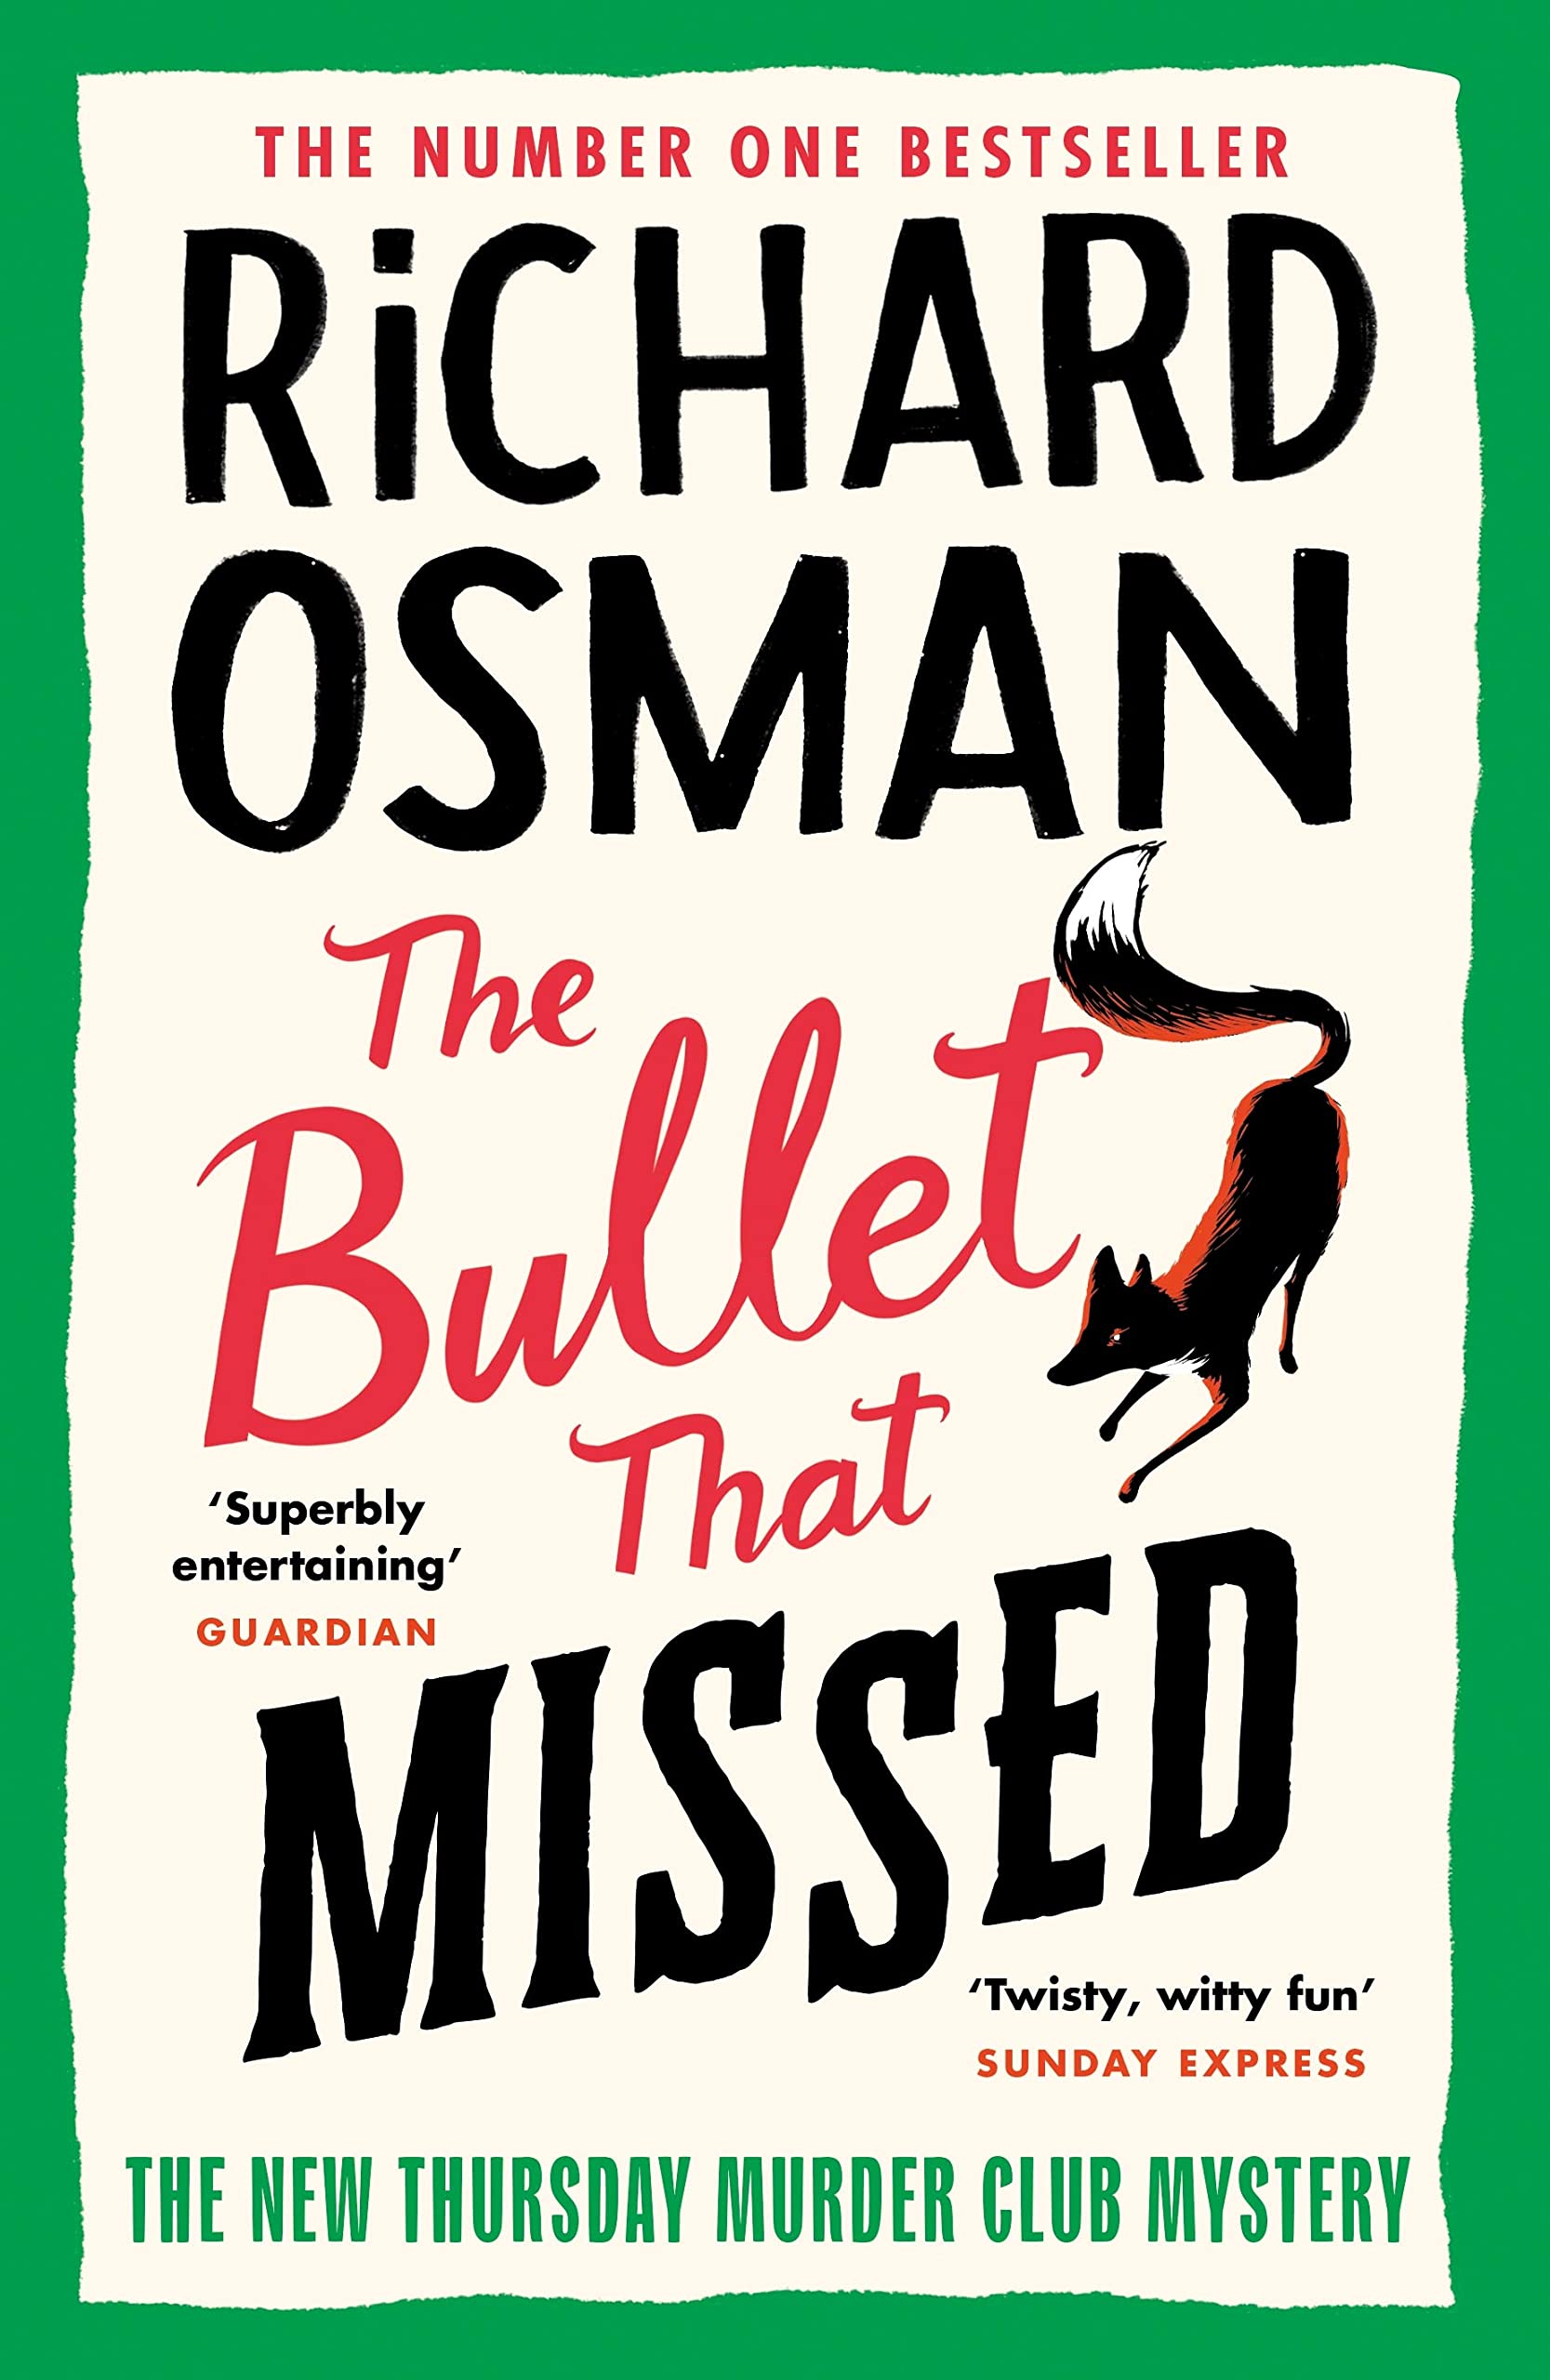 Book cover of The Bullet That Missed by Richard Osman, book 3 in the Thursday Murder Club series